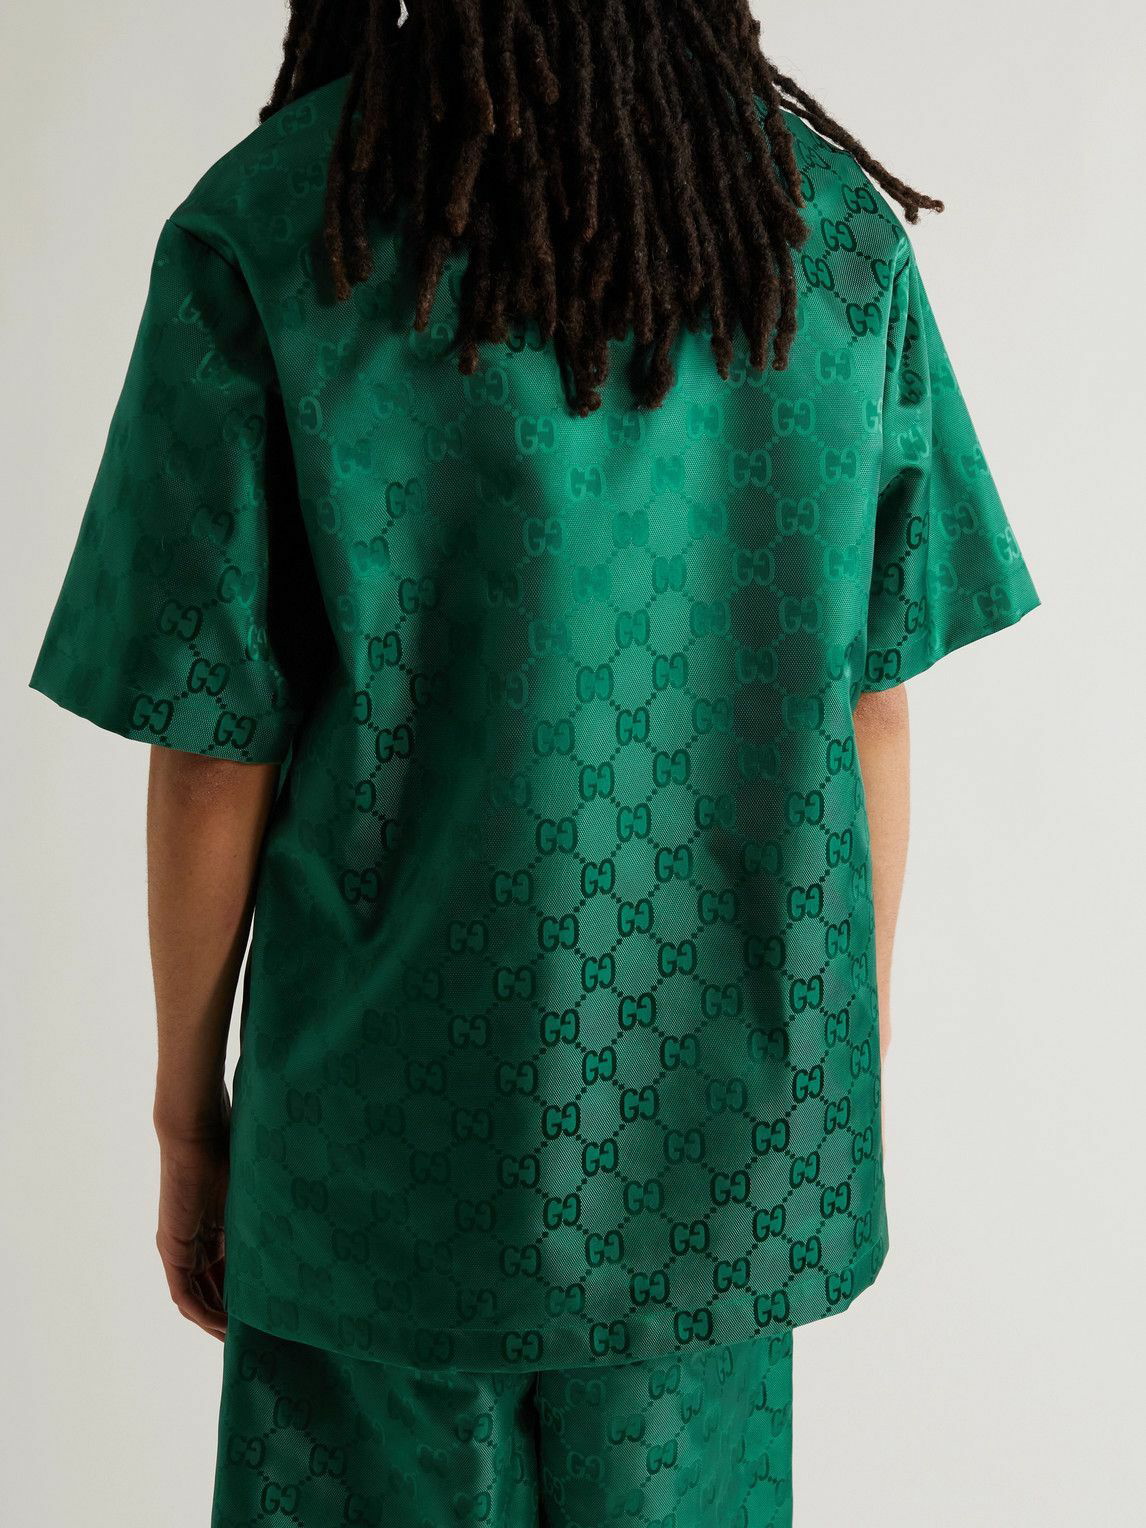 Gucci Oversized Cotton T-Shirt with GG